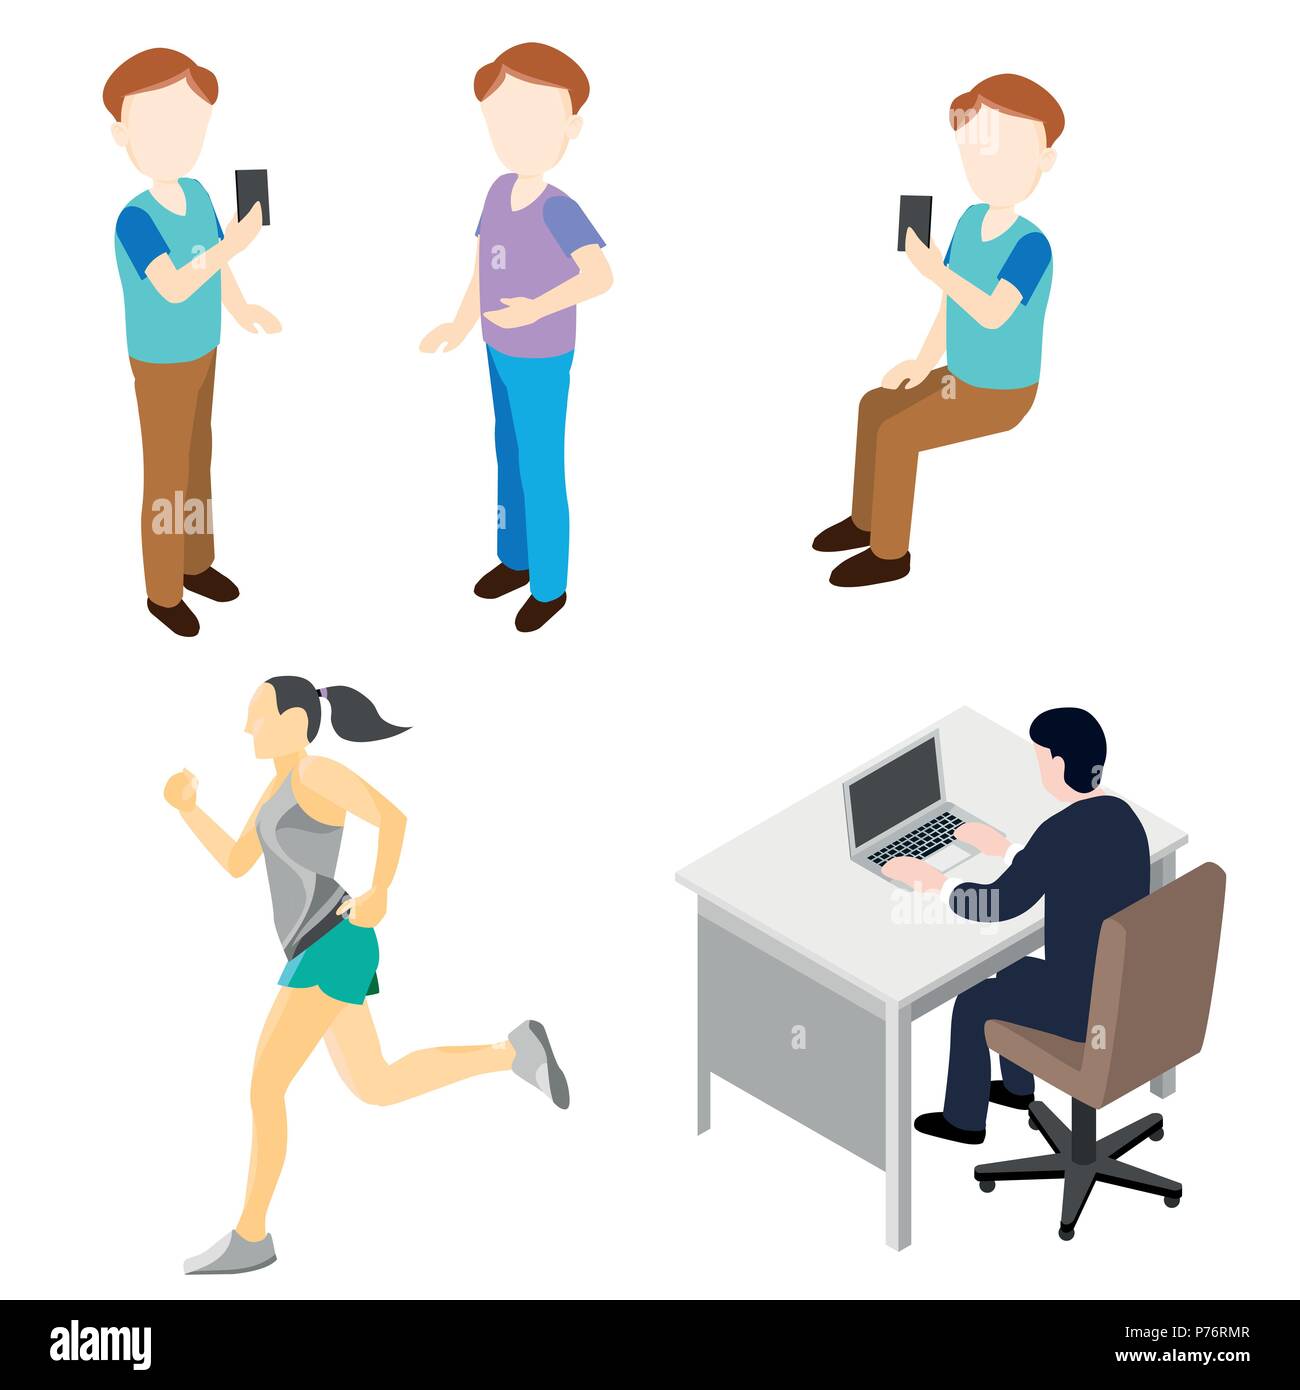 People in Various Activity, mens, woman, worker, jogging for business and life style concept - Flat Vector Illustration. Stock Vector